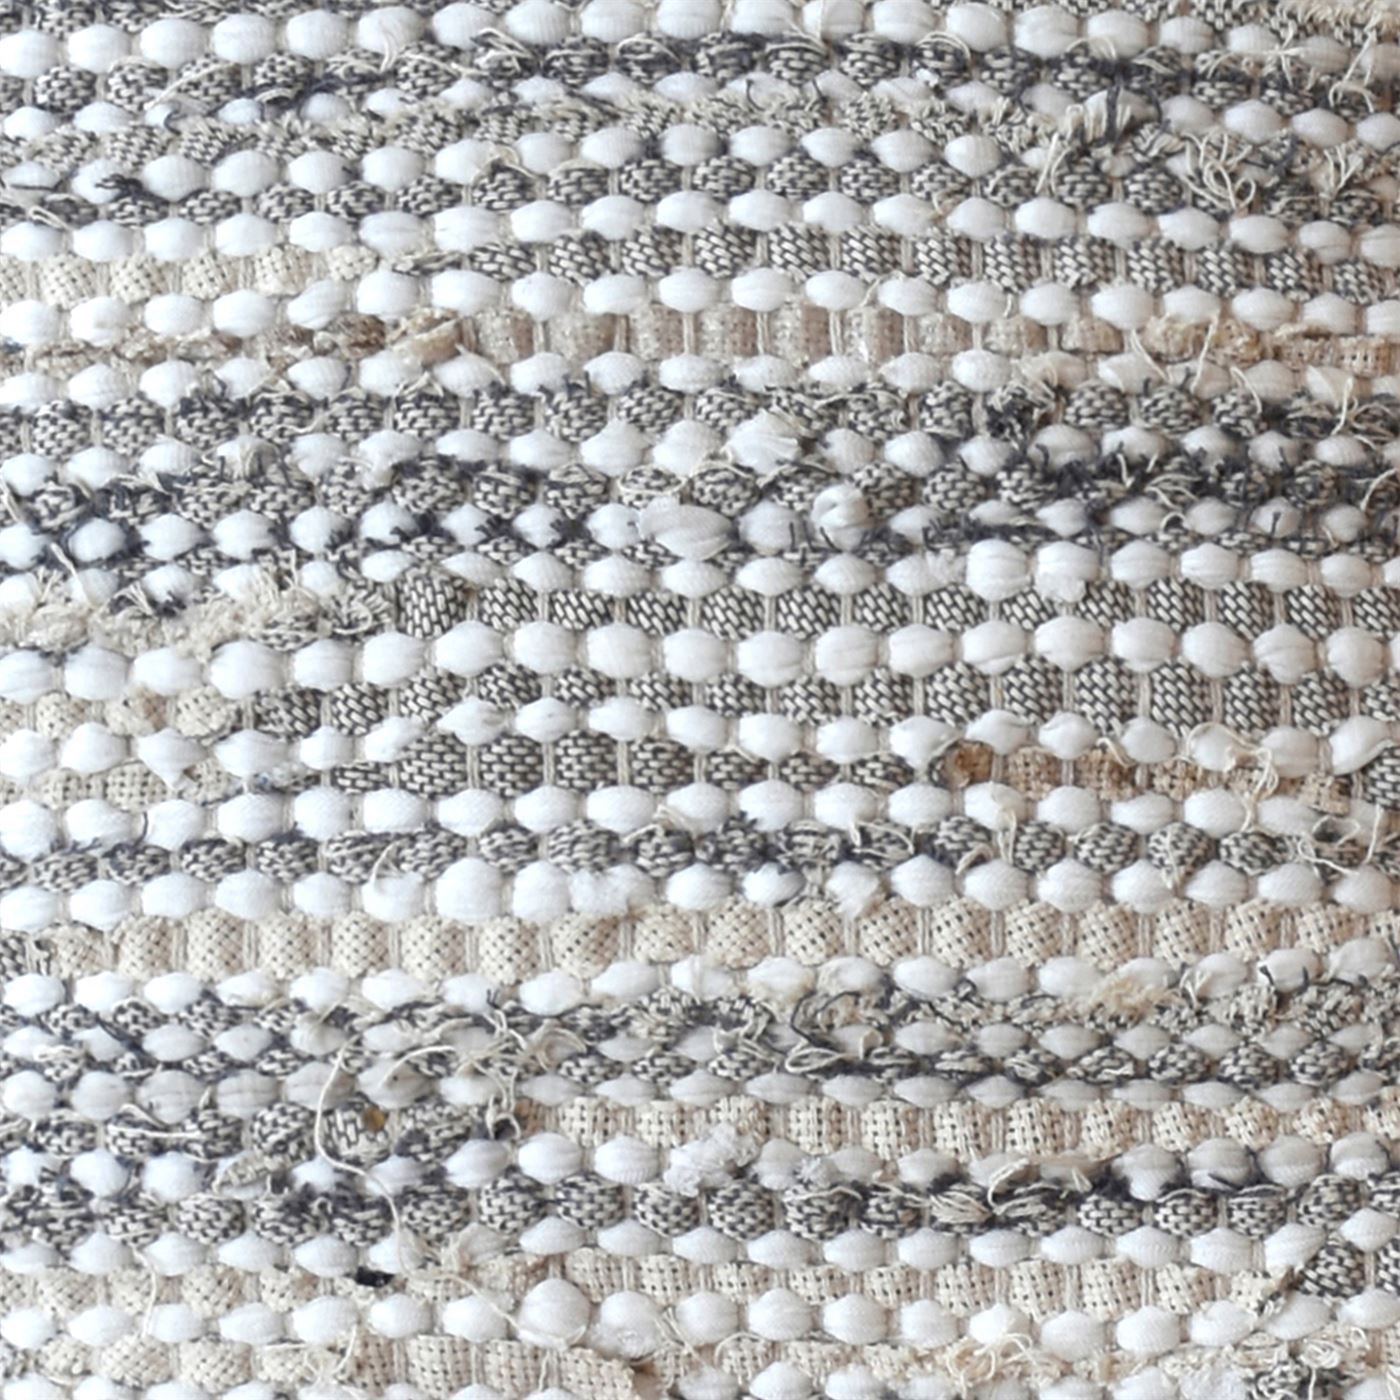 Sarta Pillow, Cotton, Recycled Fabric, Natural White, Beige, Grey, Pitloom, Flat Weave